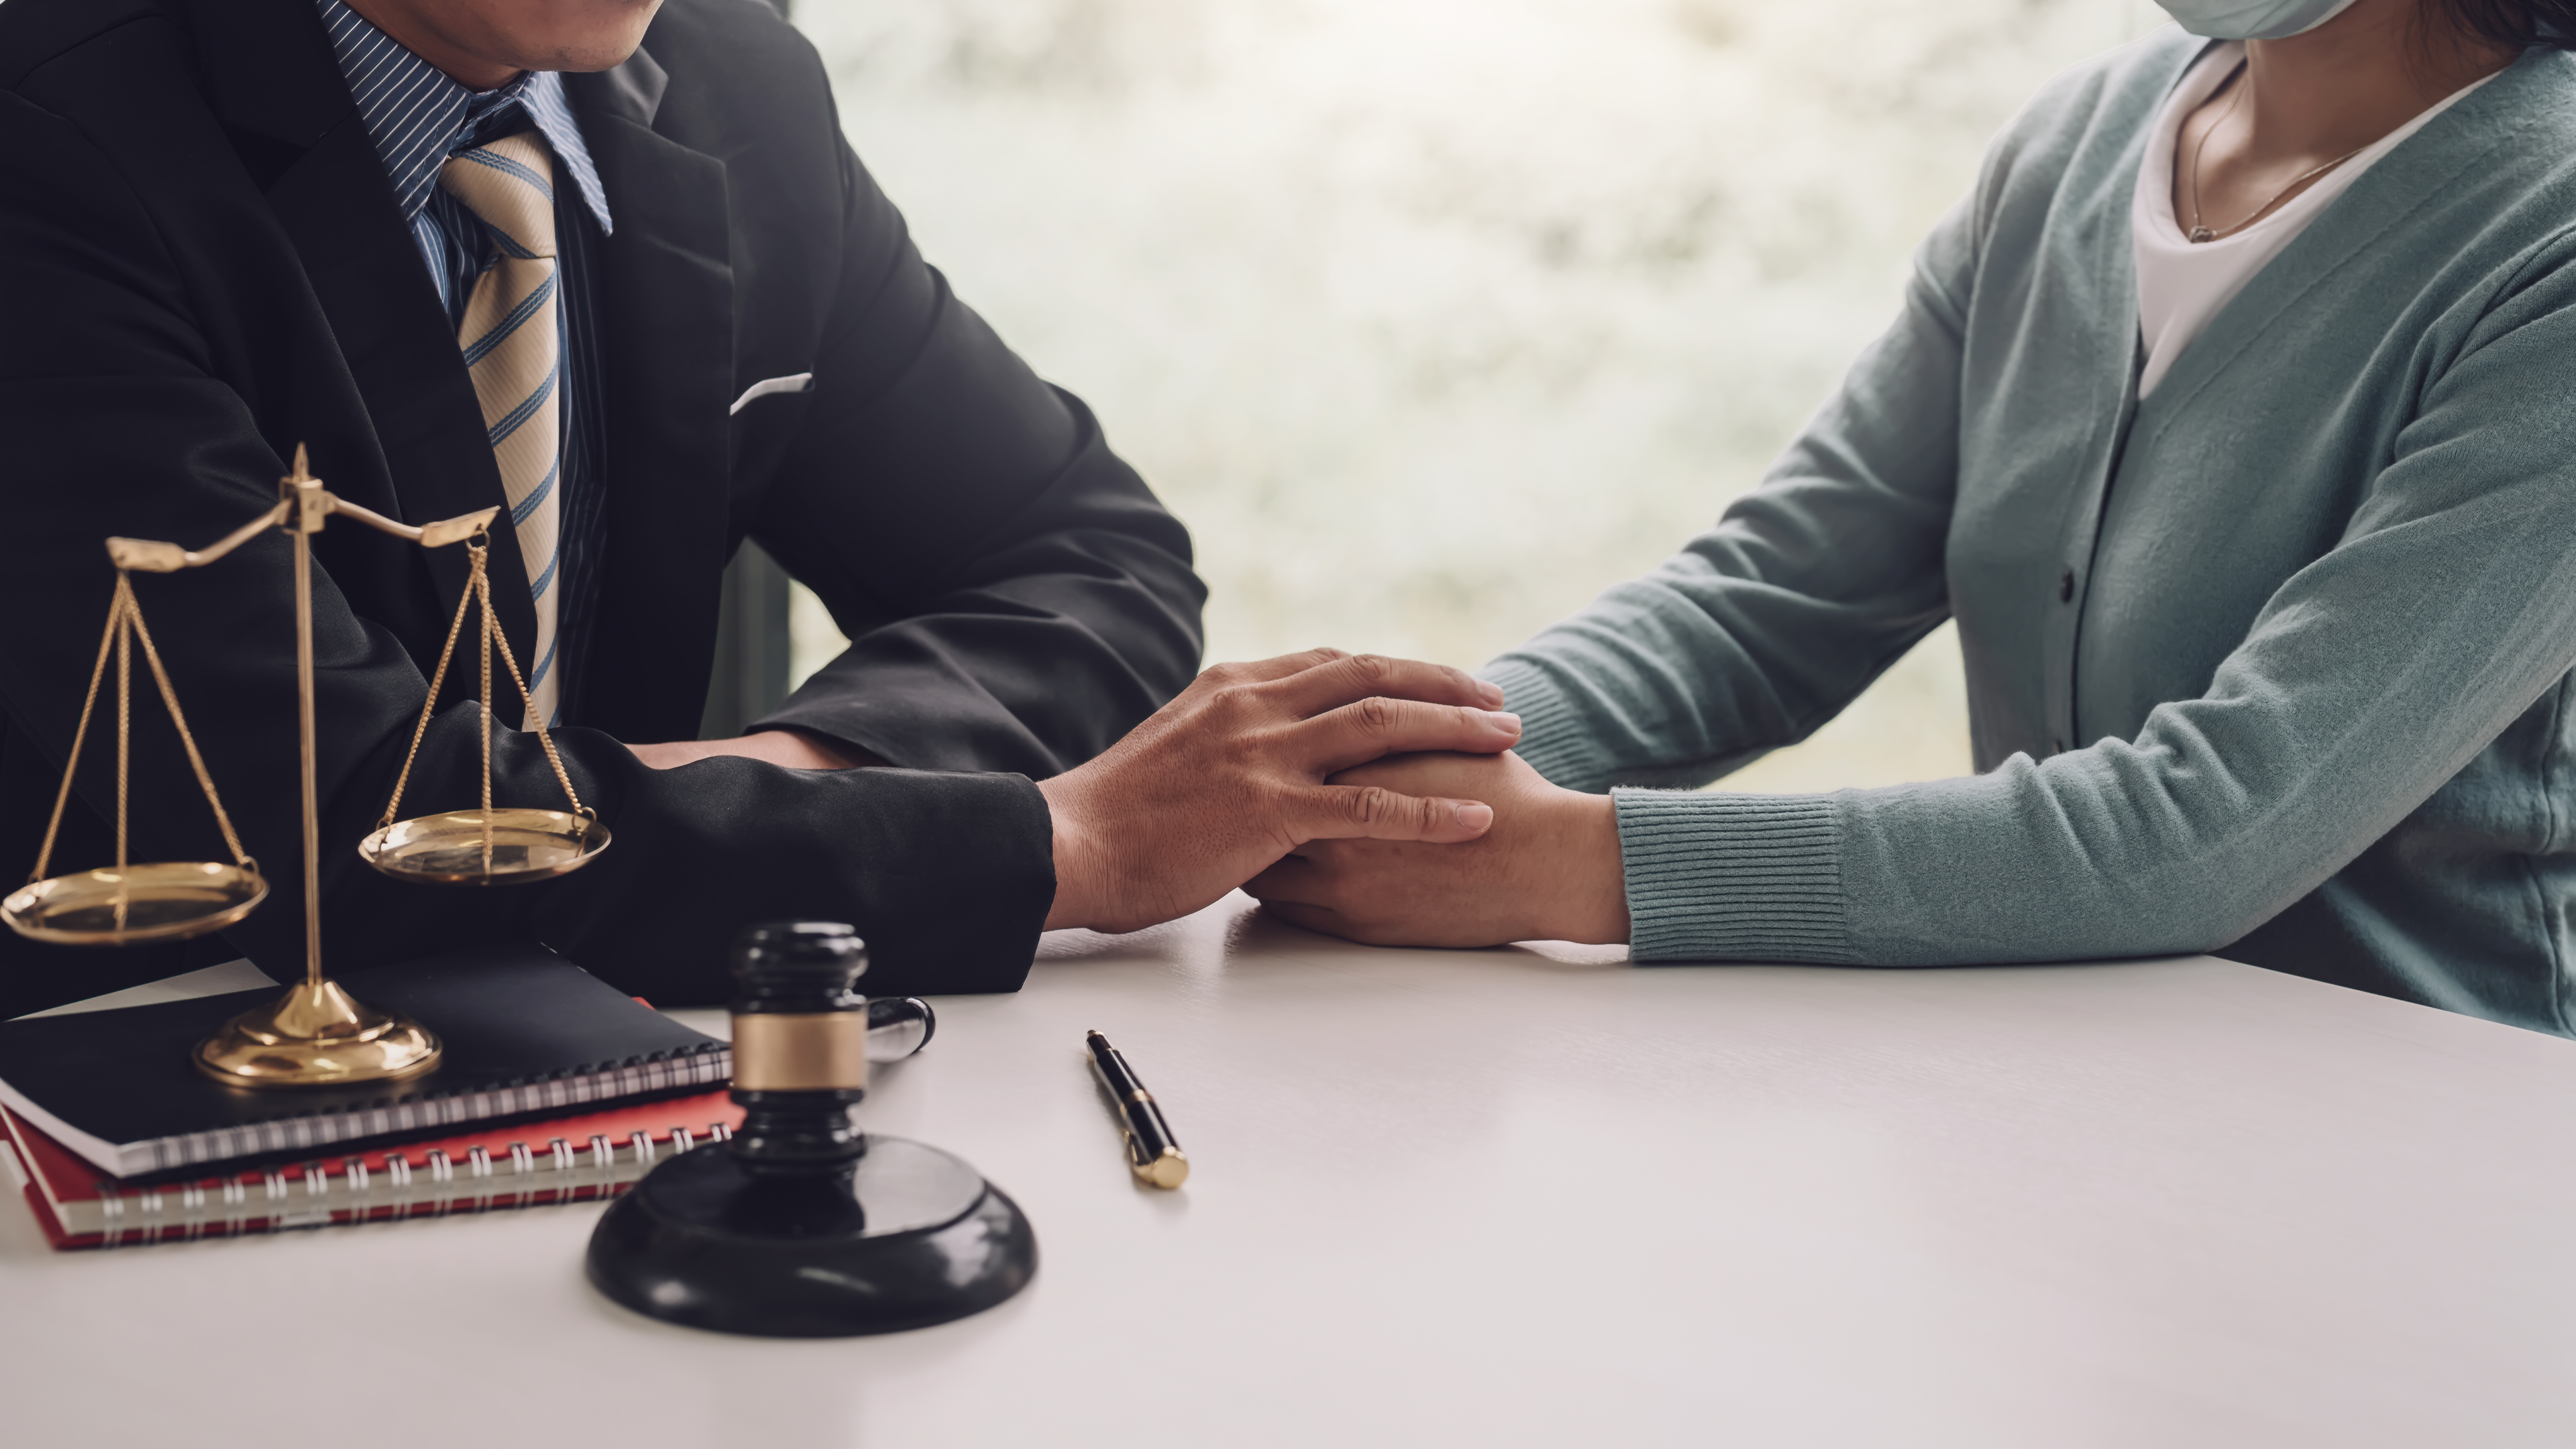 "Trust and Estate Planning: A lawyer and client seal the deal with a handshake in the office."